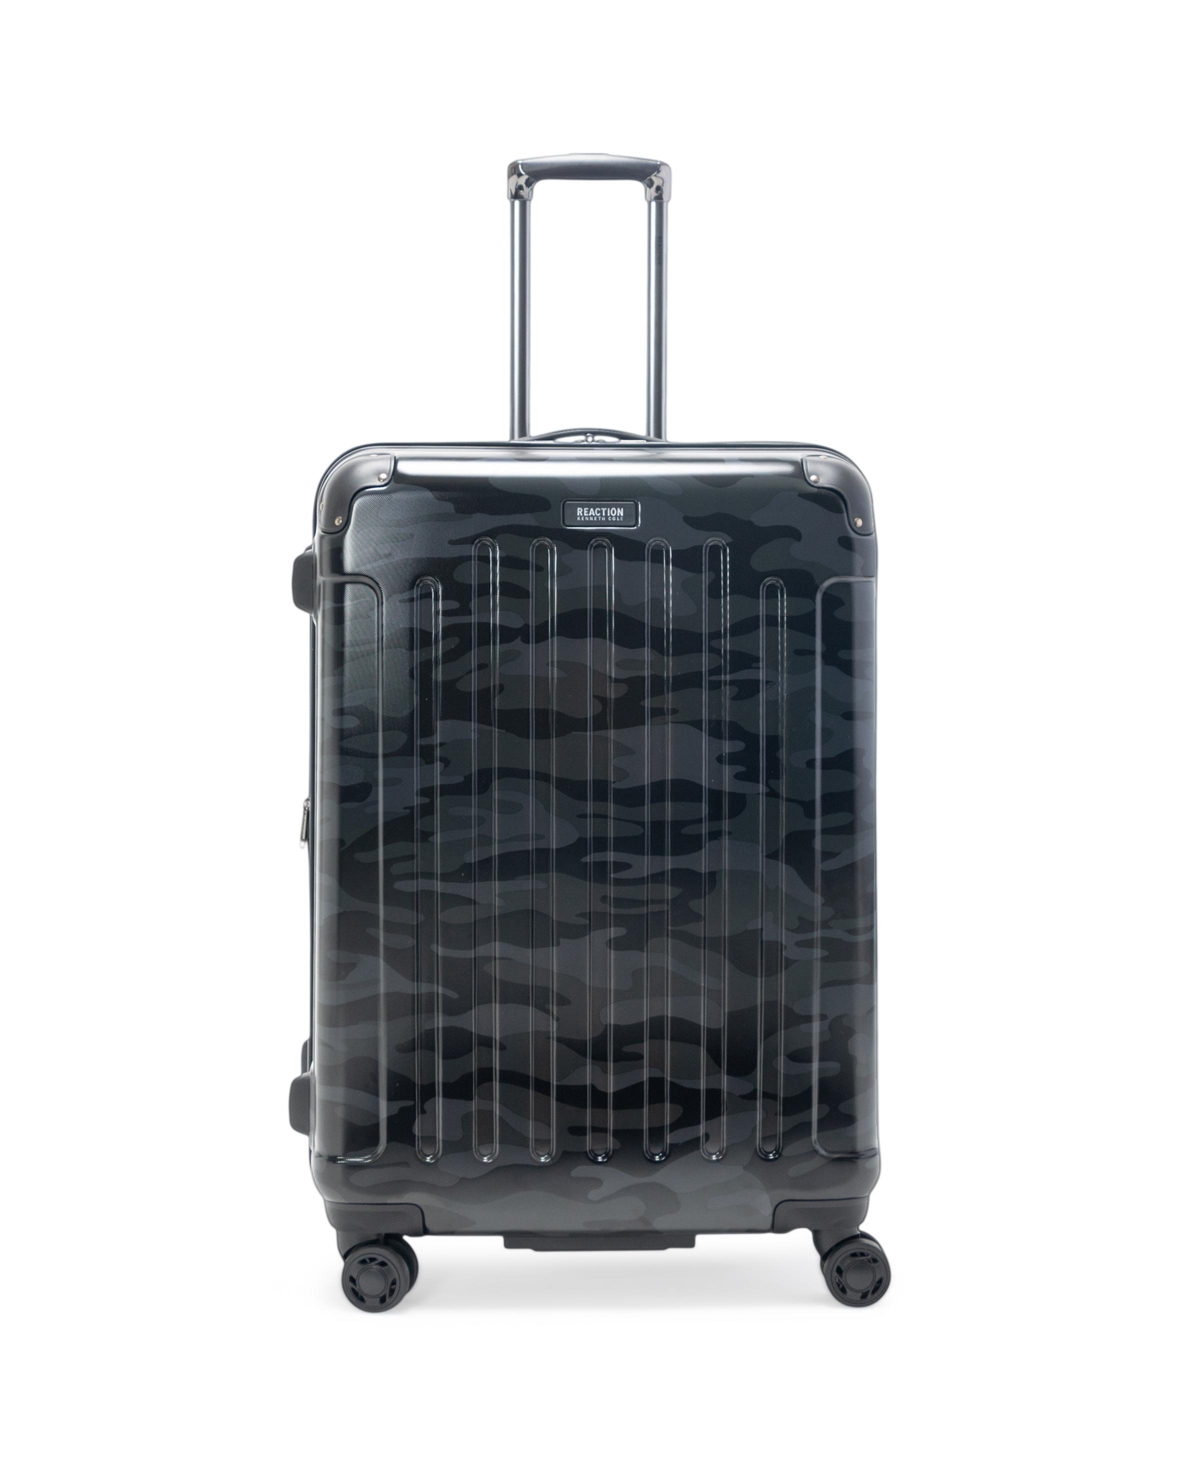 Kenneth Cole Reaction Renegade Camo 28" Hardside Expandable Luggage In Camo Black